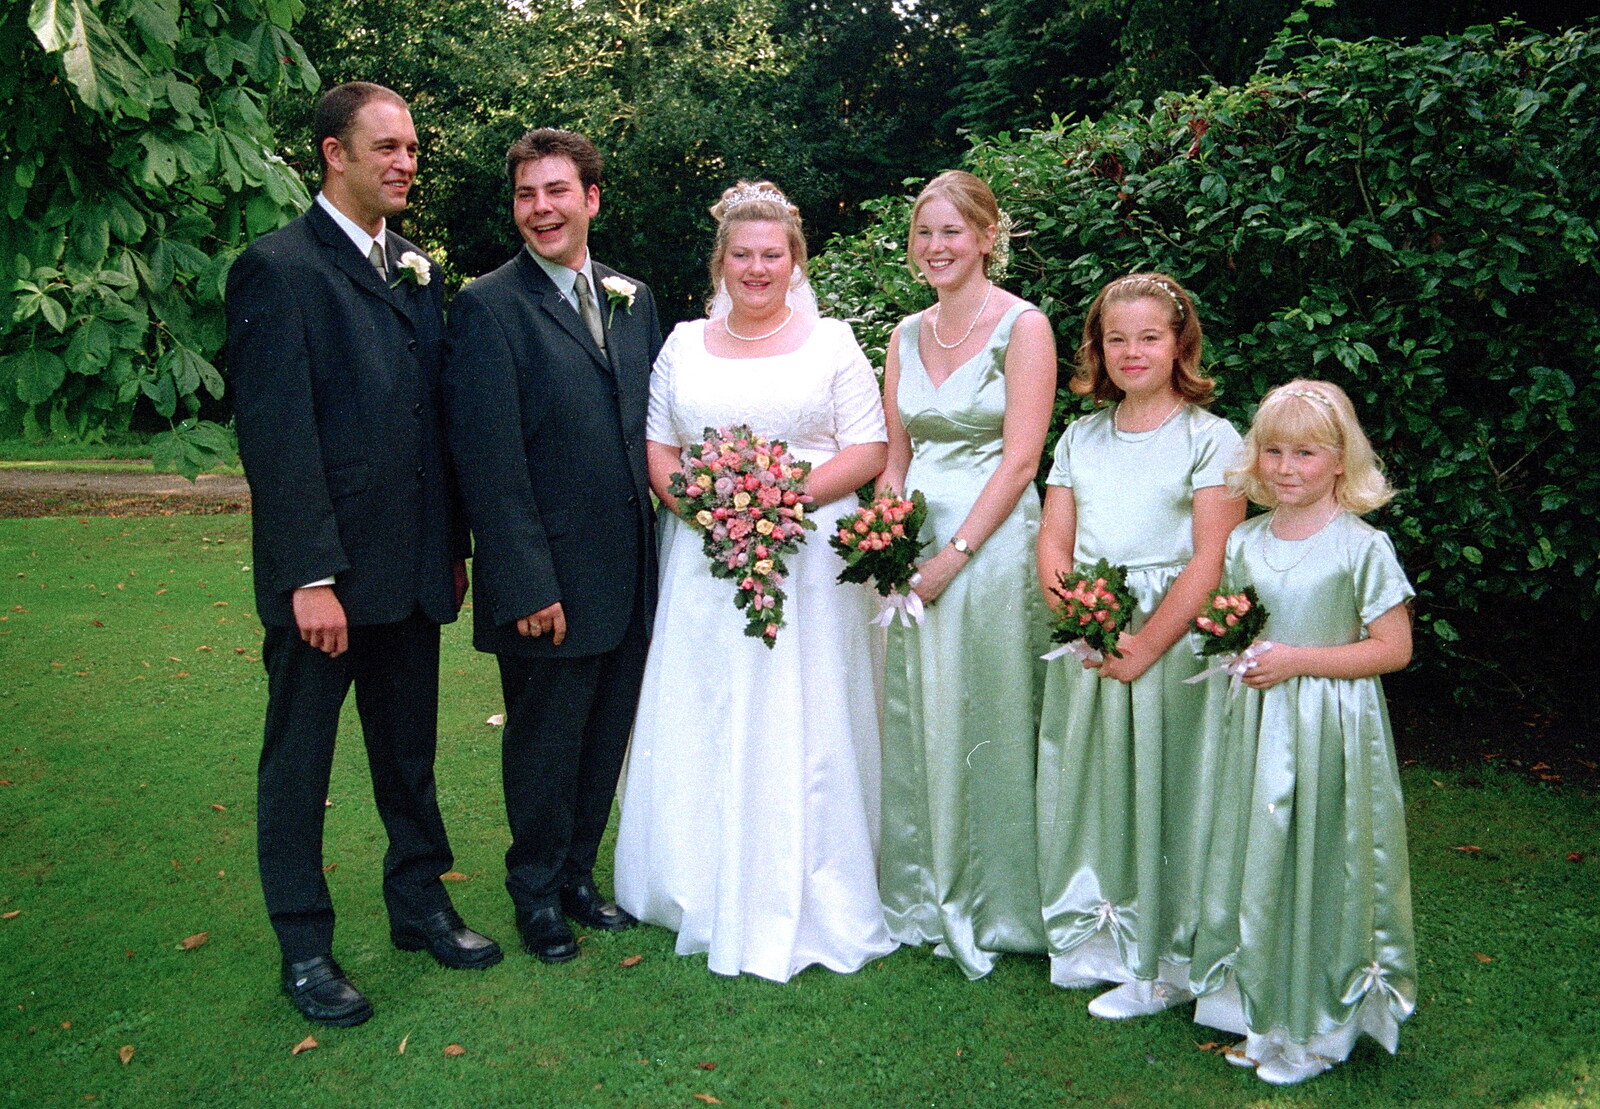 Wedding photo time from Helen and Neil's Wedding, The Oaksmere, Brome, Suffolk - 4th August 2000